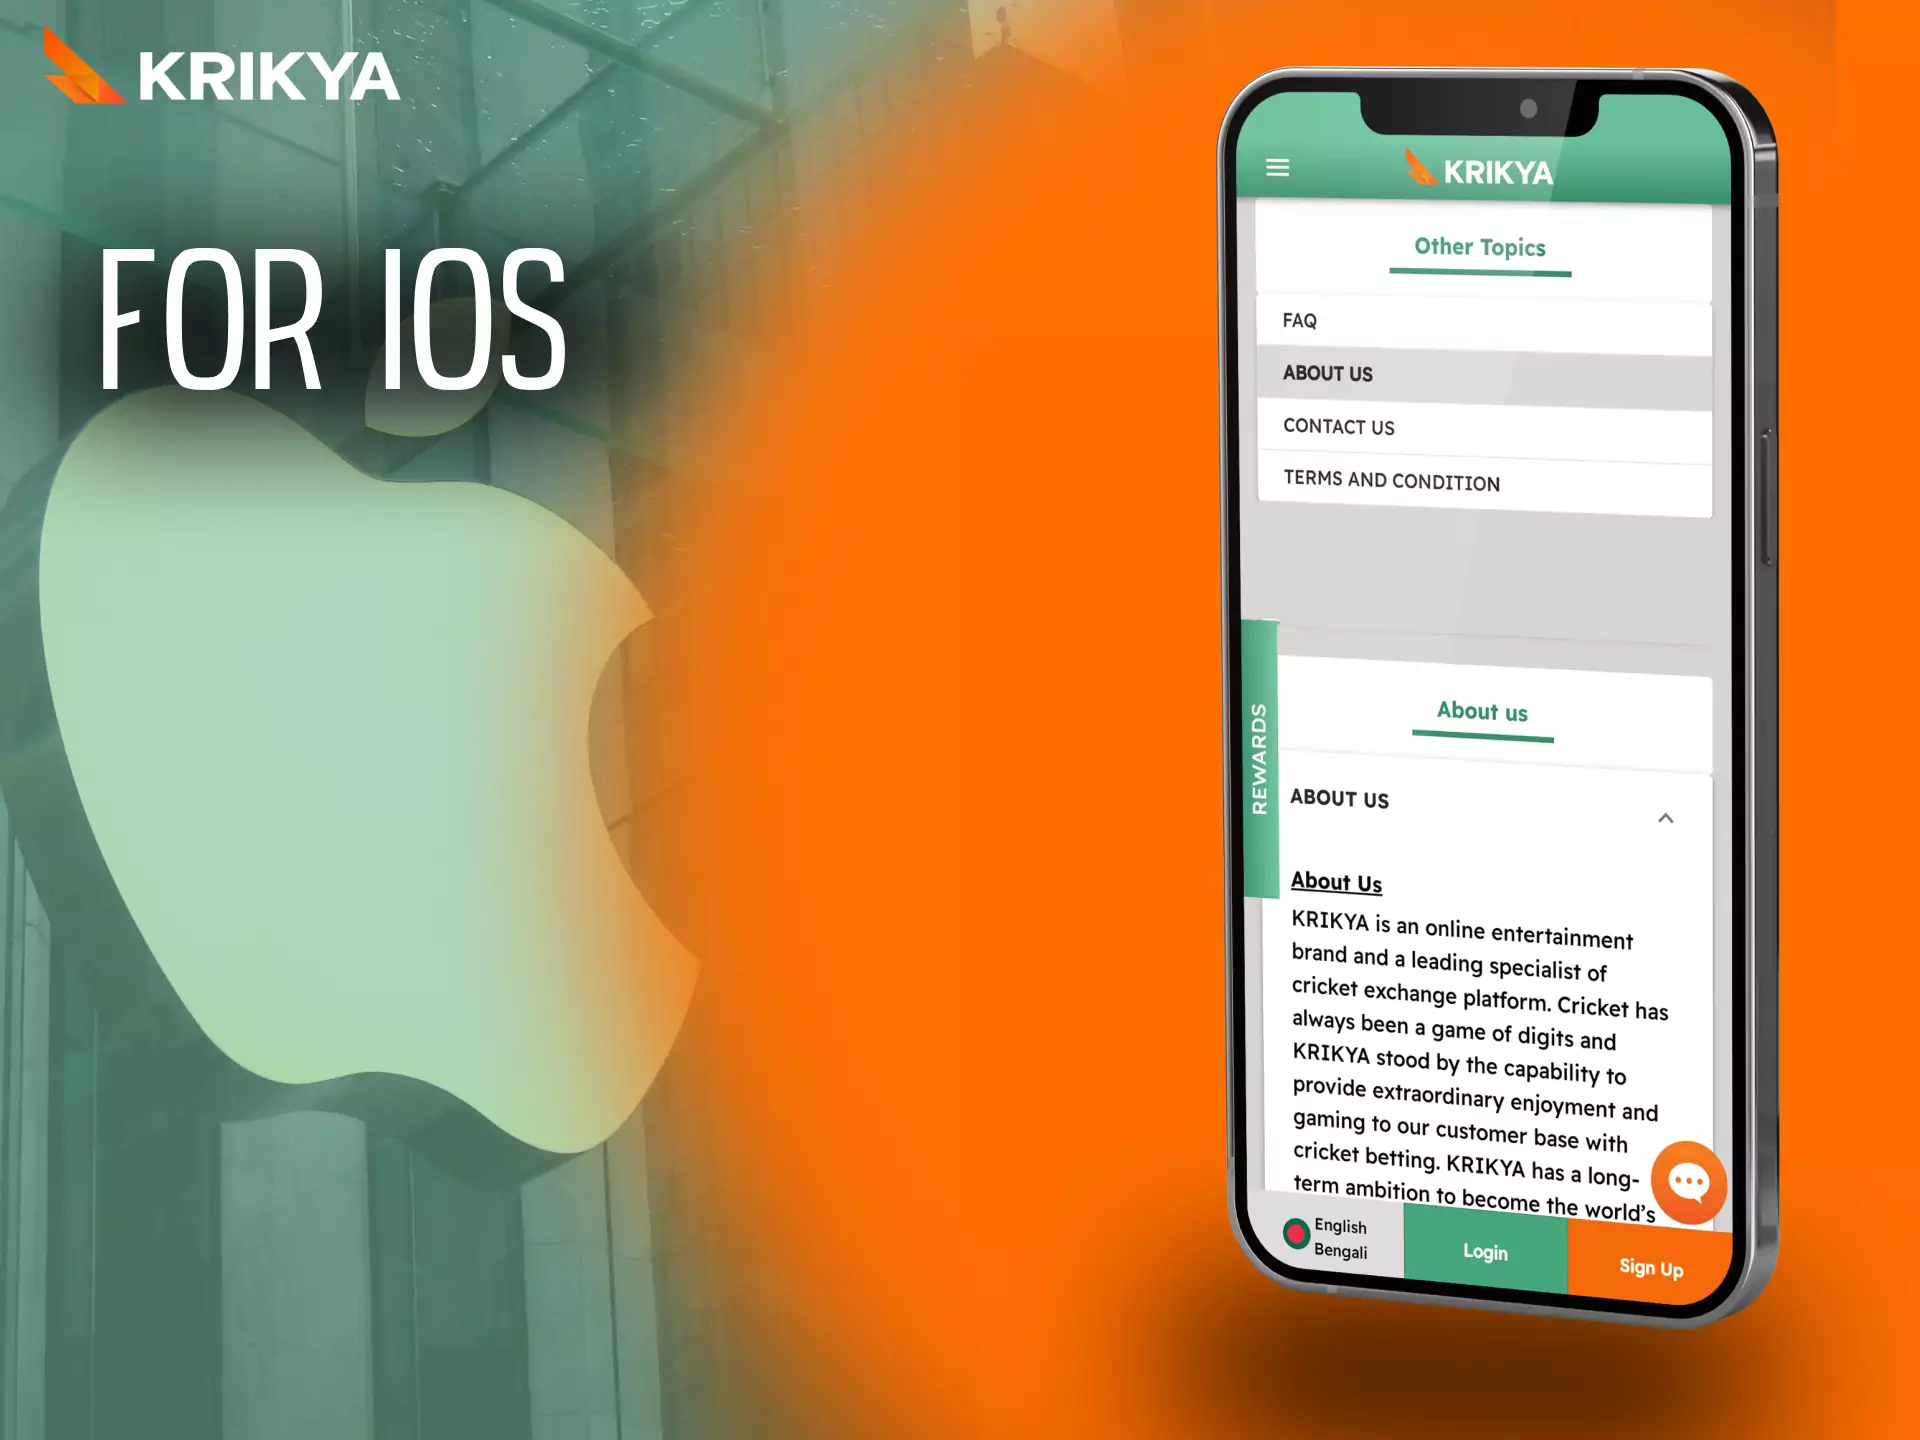 The Krikya application is available to all users of iOS devices.